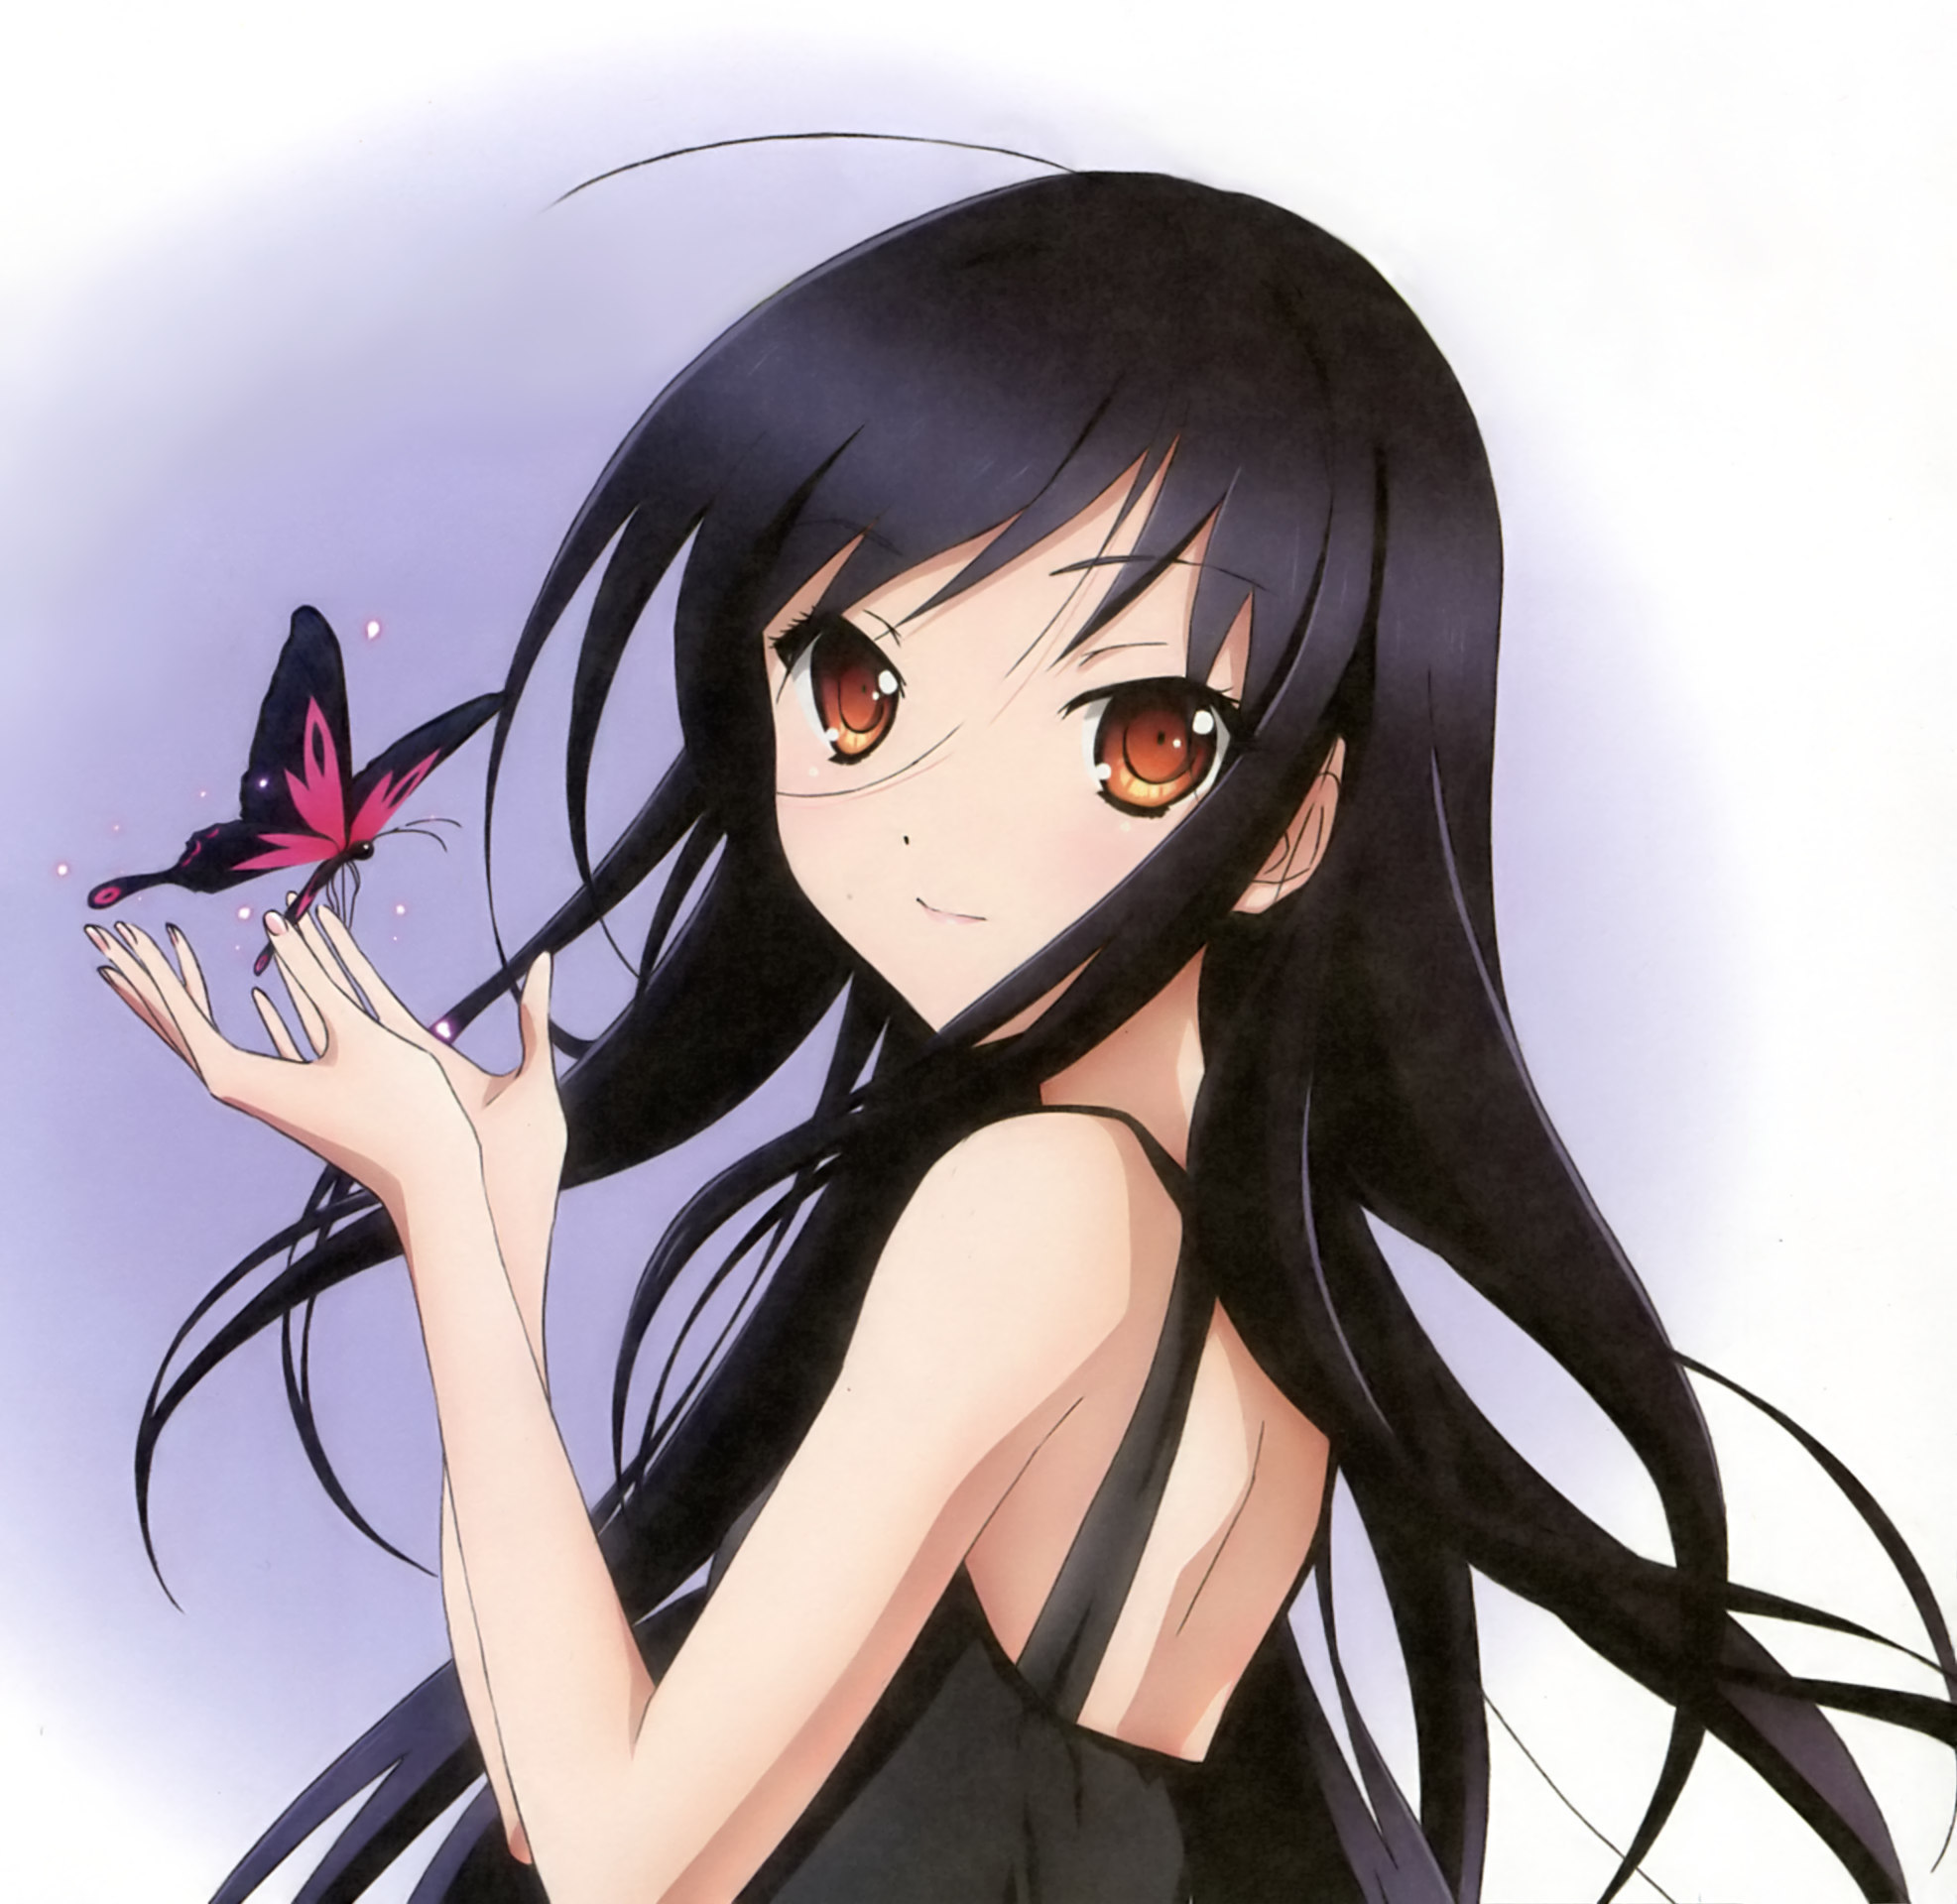 Amazing Accel World Pictures & Backgrounds